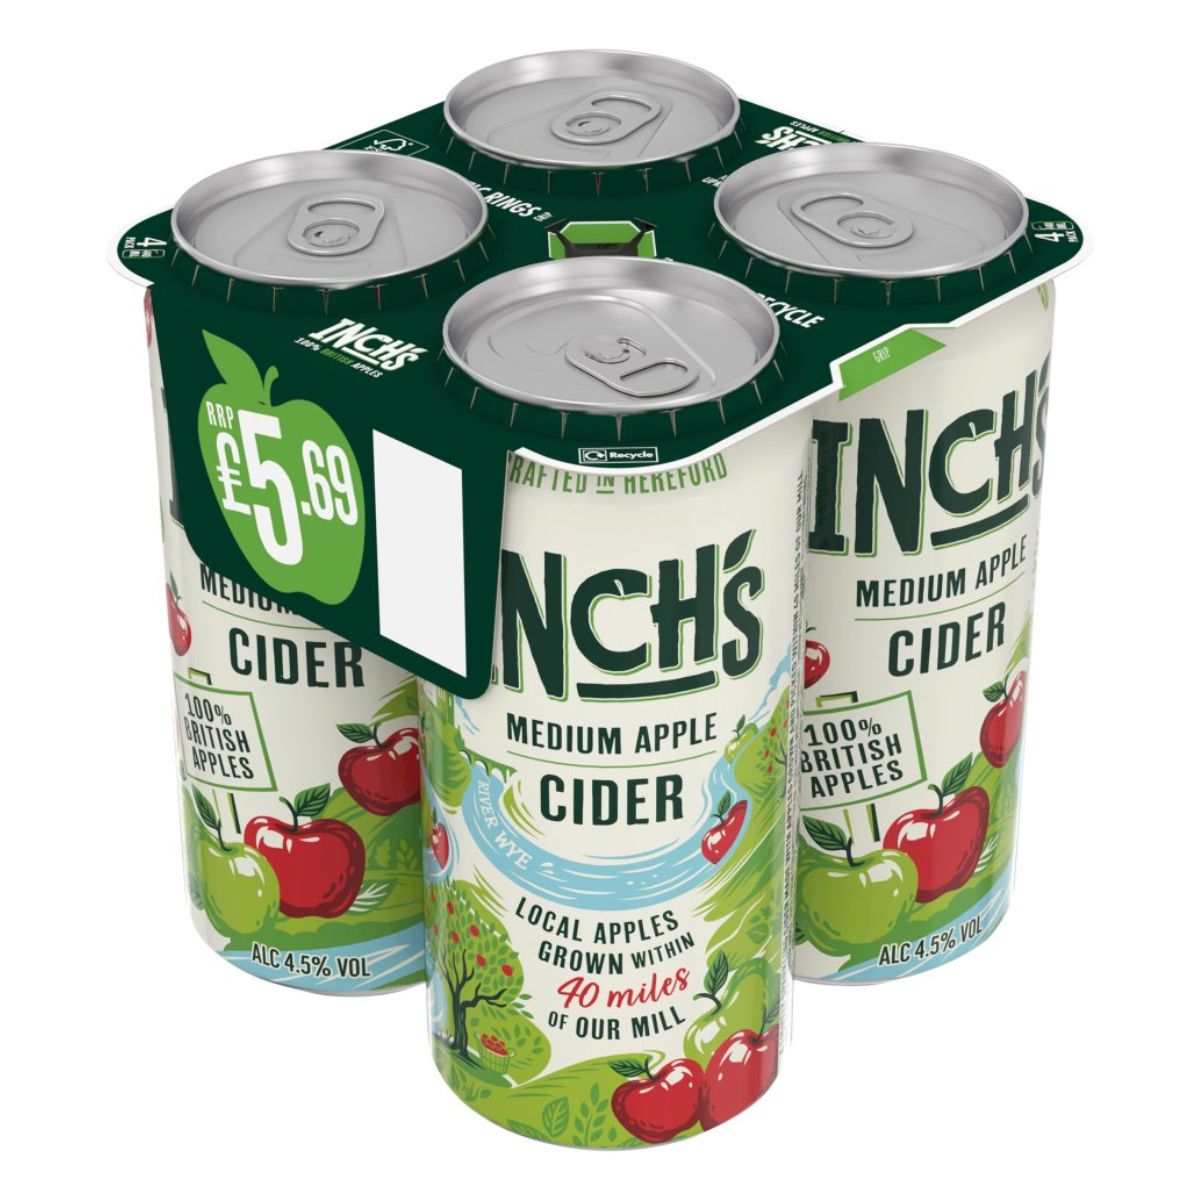 Four cans of Inchs - Medium Apple Cider Can (4.5% ABV) - 4 x 440ml on a white background.